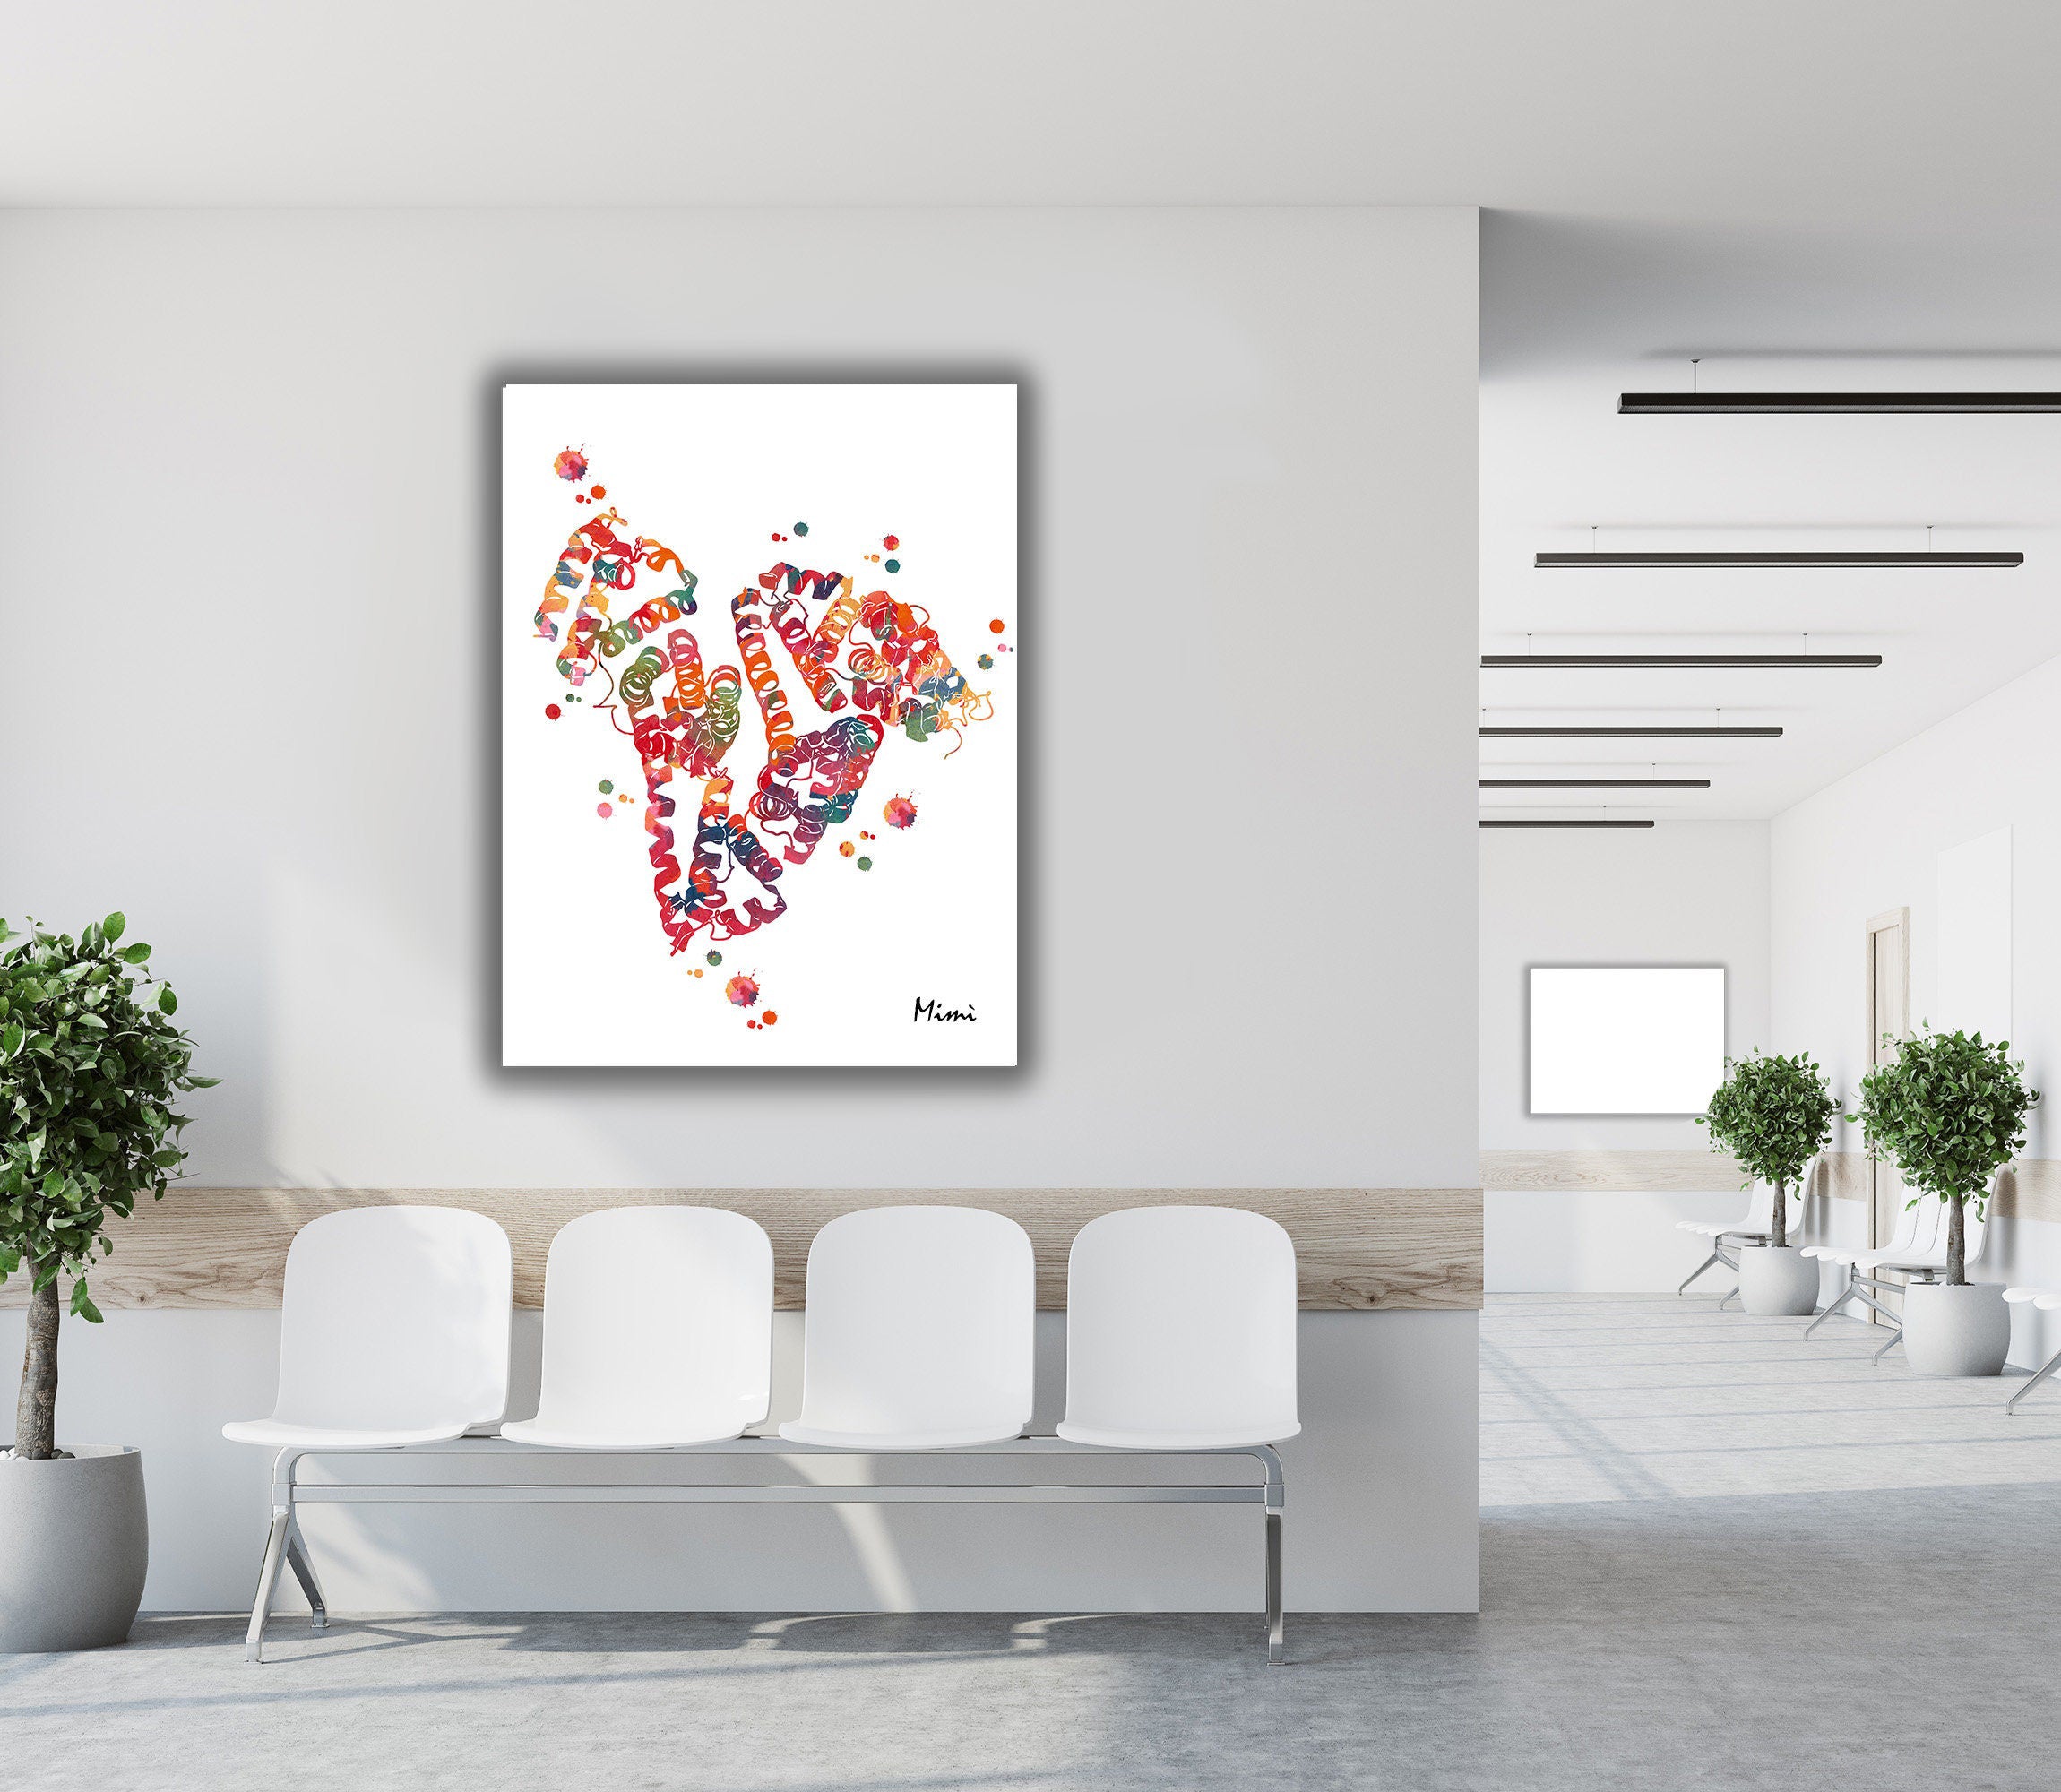 Fourth Image of Albumin Protein Molecular Structure Watercolor Print